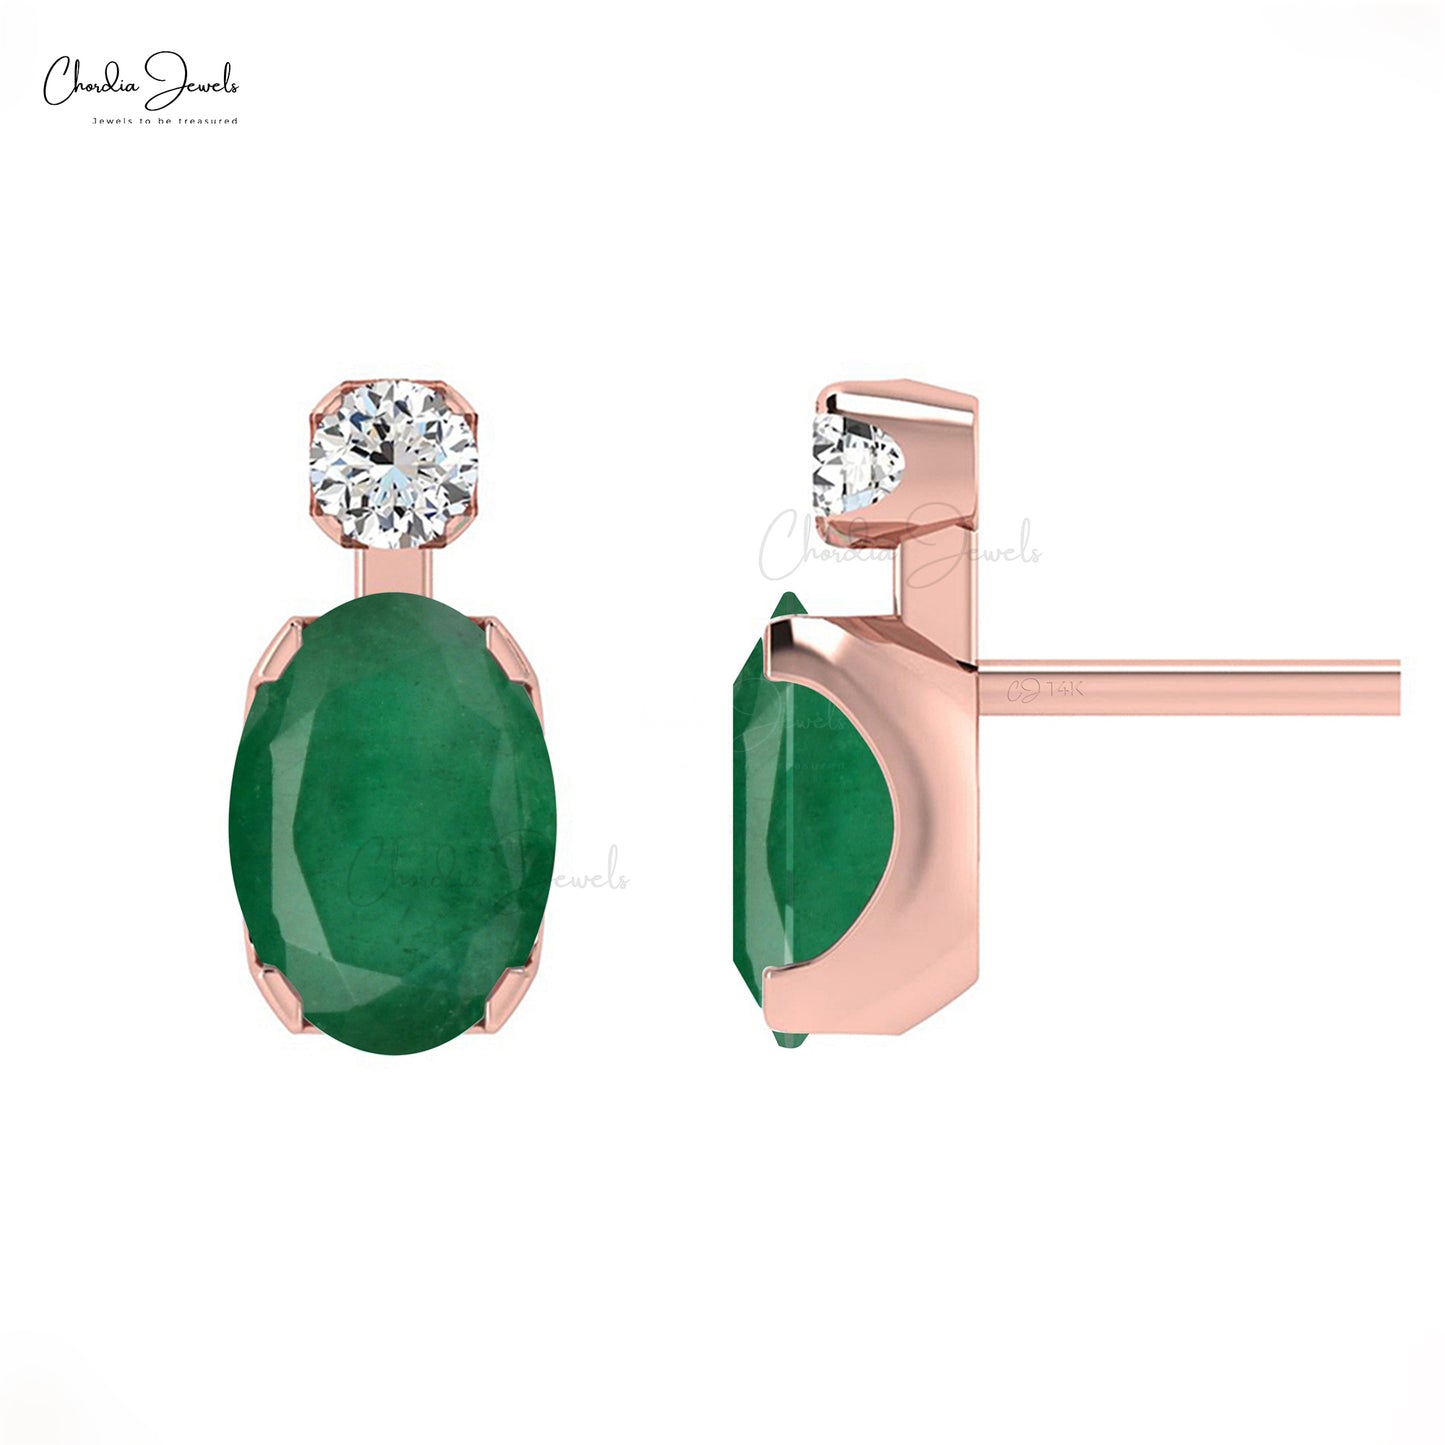 Enhance your personal style with these may birthstone earrings.